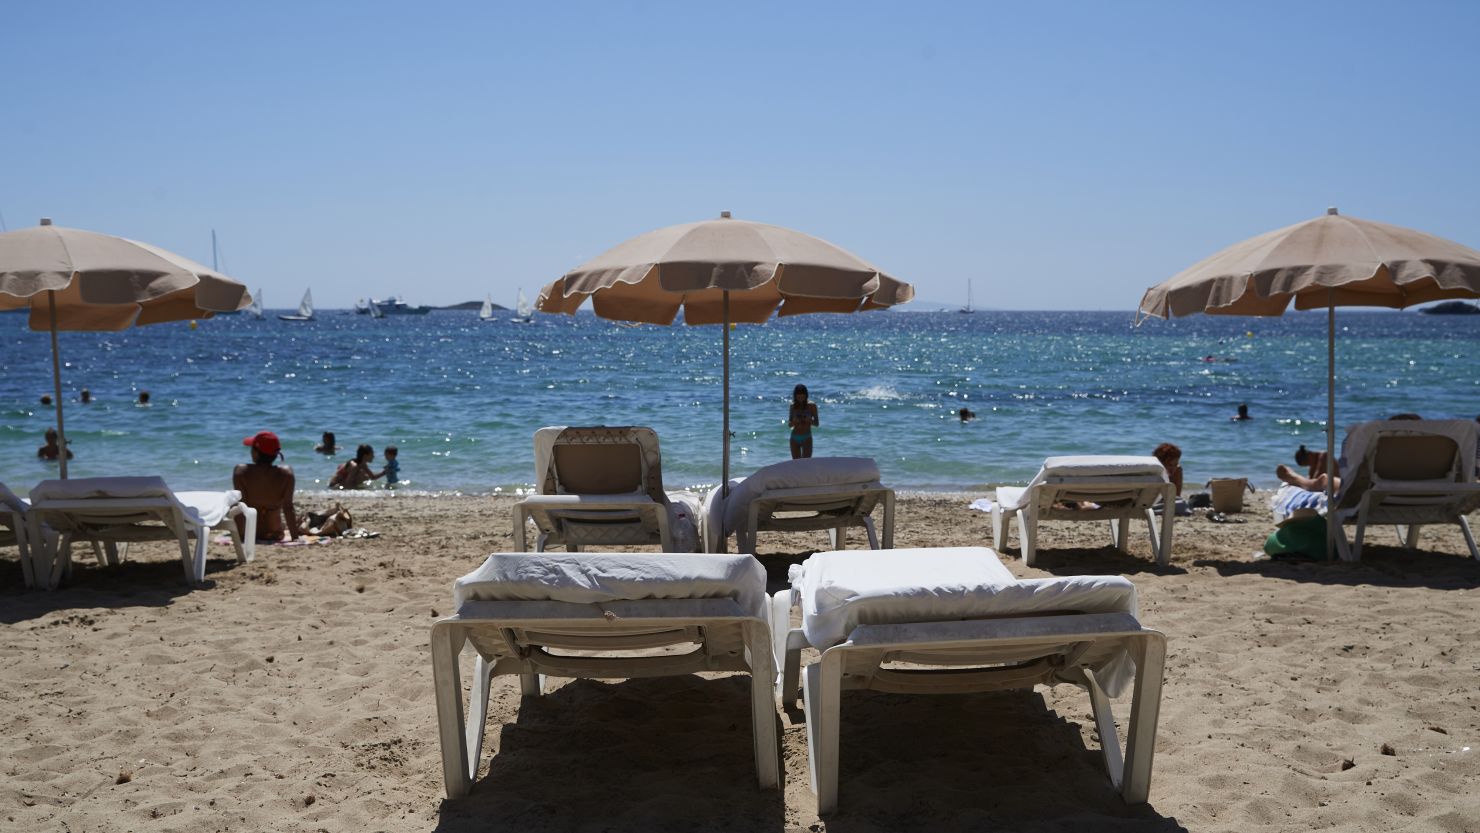 IBIZA, SPAIN - AUGUST 16:  Detail view of the Figueretes beach on August 17, 2020 in Ibiza, Spain. Almost all Schengen countries recommend not traveling to Spain due to COVID -19. The quarantine imposed by the United Kingdom has been decisive, many establishments have not opened and the average occupancy is less than 50%. (Photo by Carlos Alvarez/Getty Images)